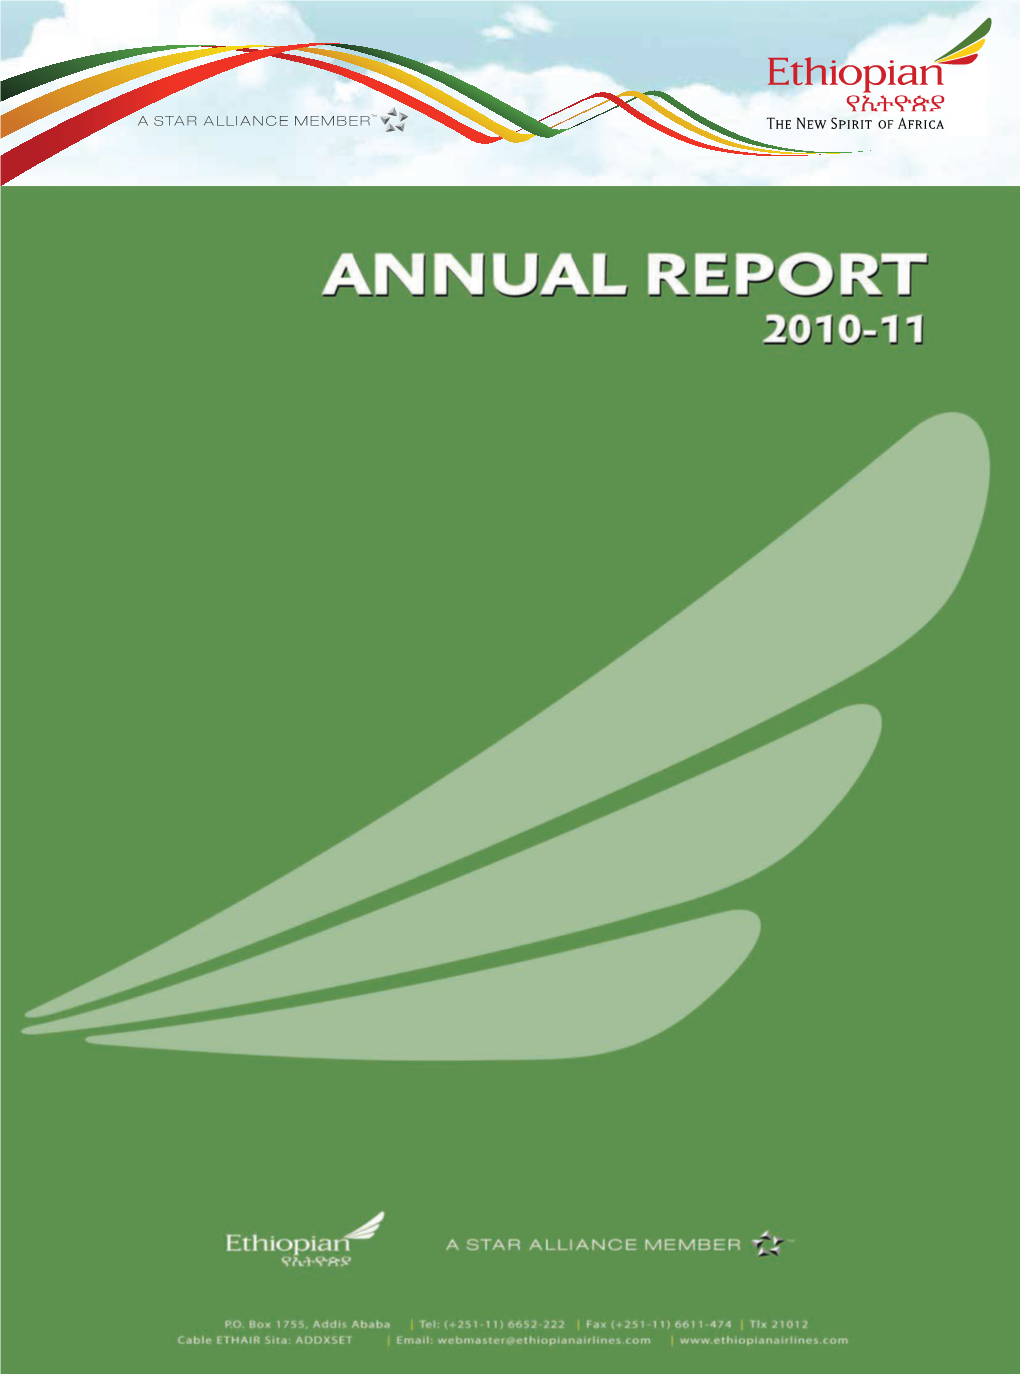 Download Annual Report 2010/11